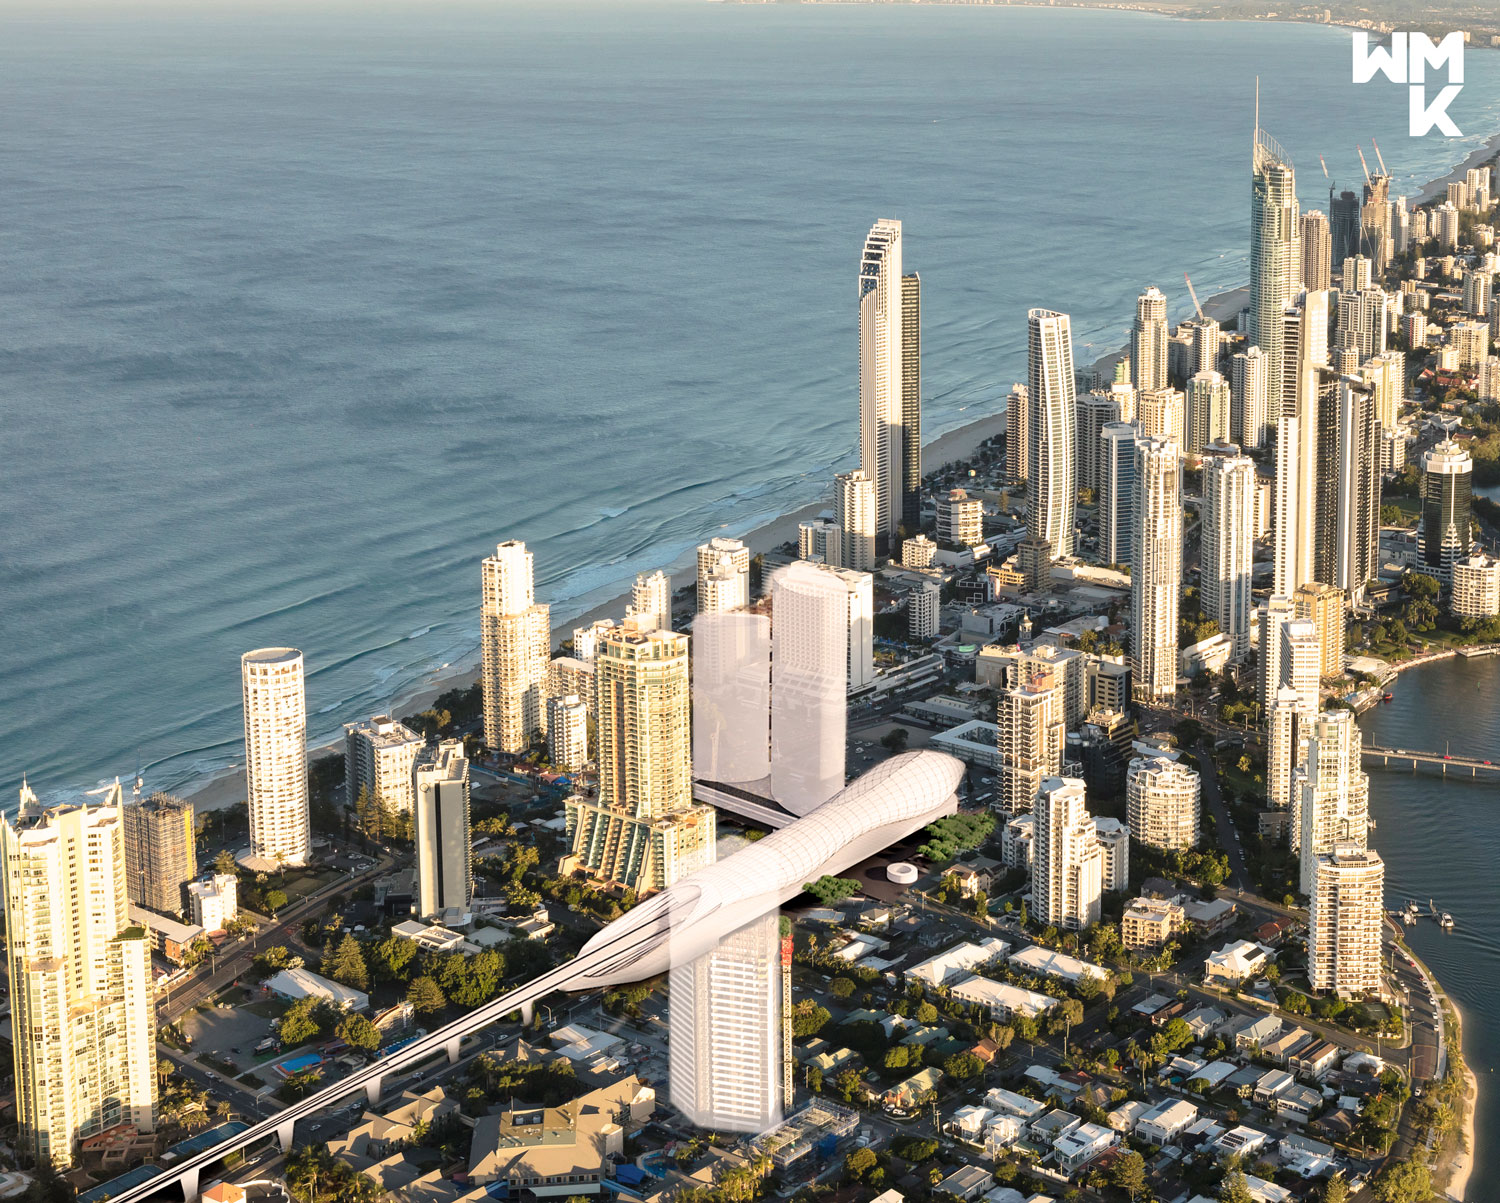 High speed rail station concept image in Surfers Paradise by WMK Architecture